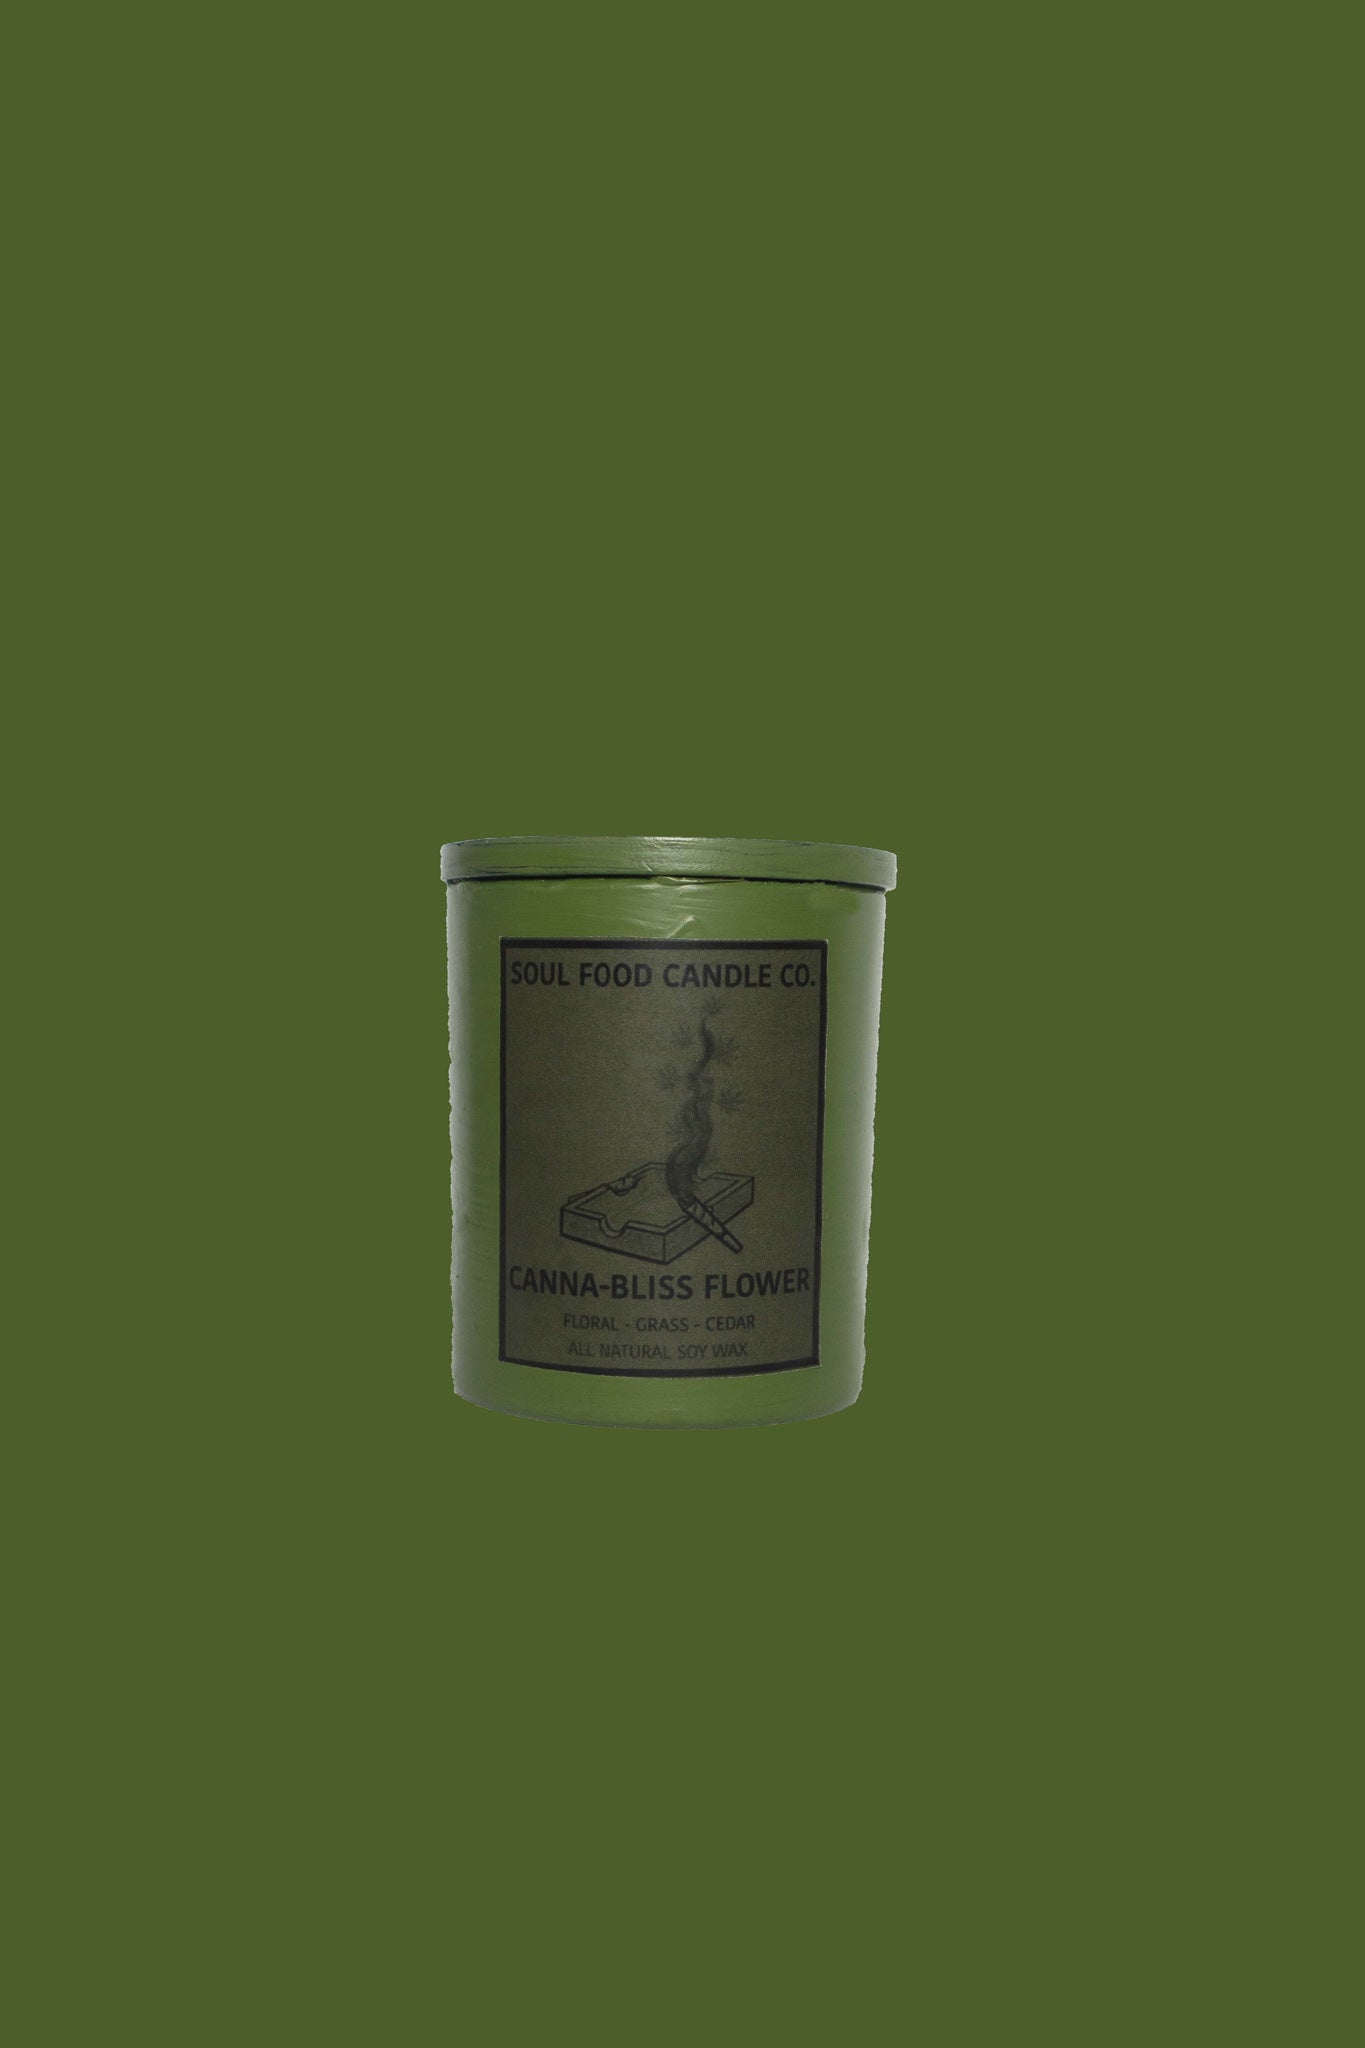 Canna-Bliss Flower - Soul Food Candle Company